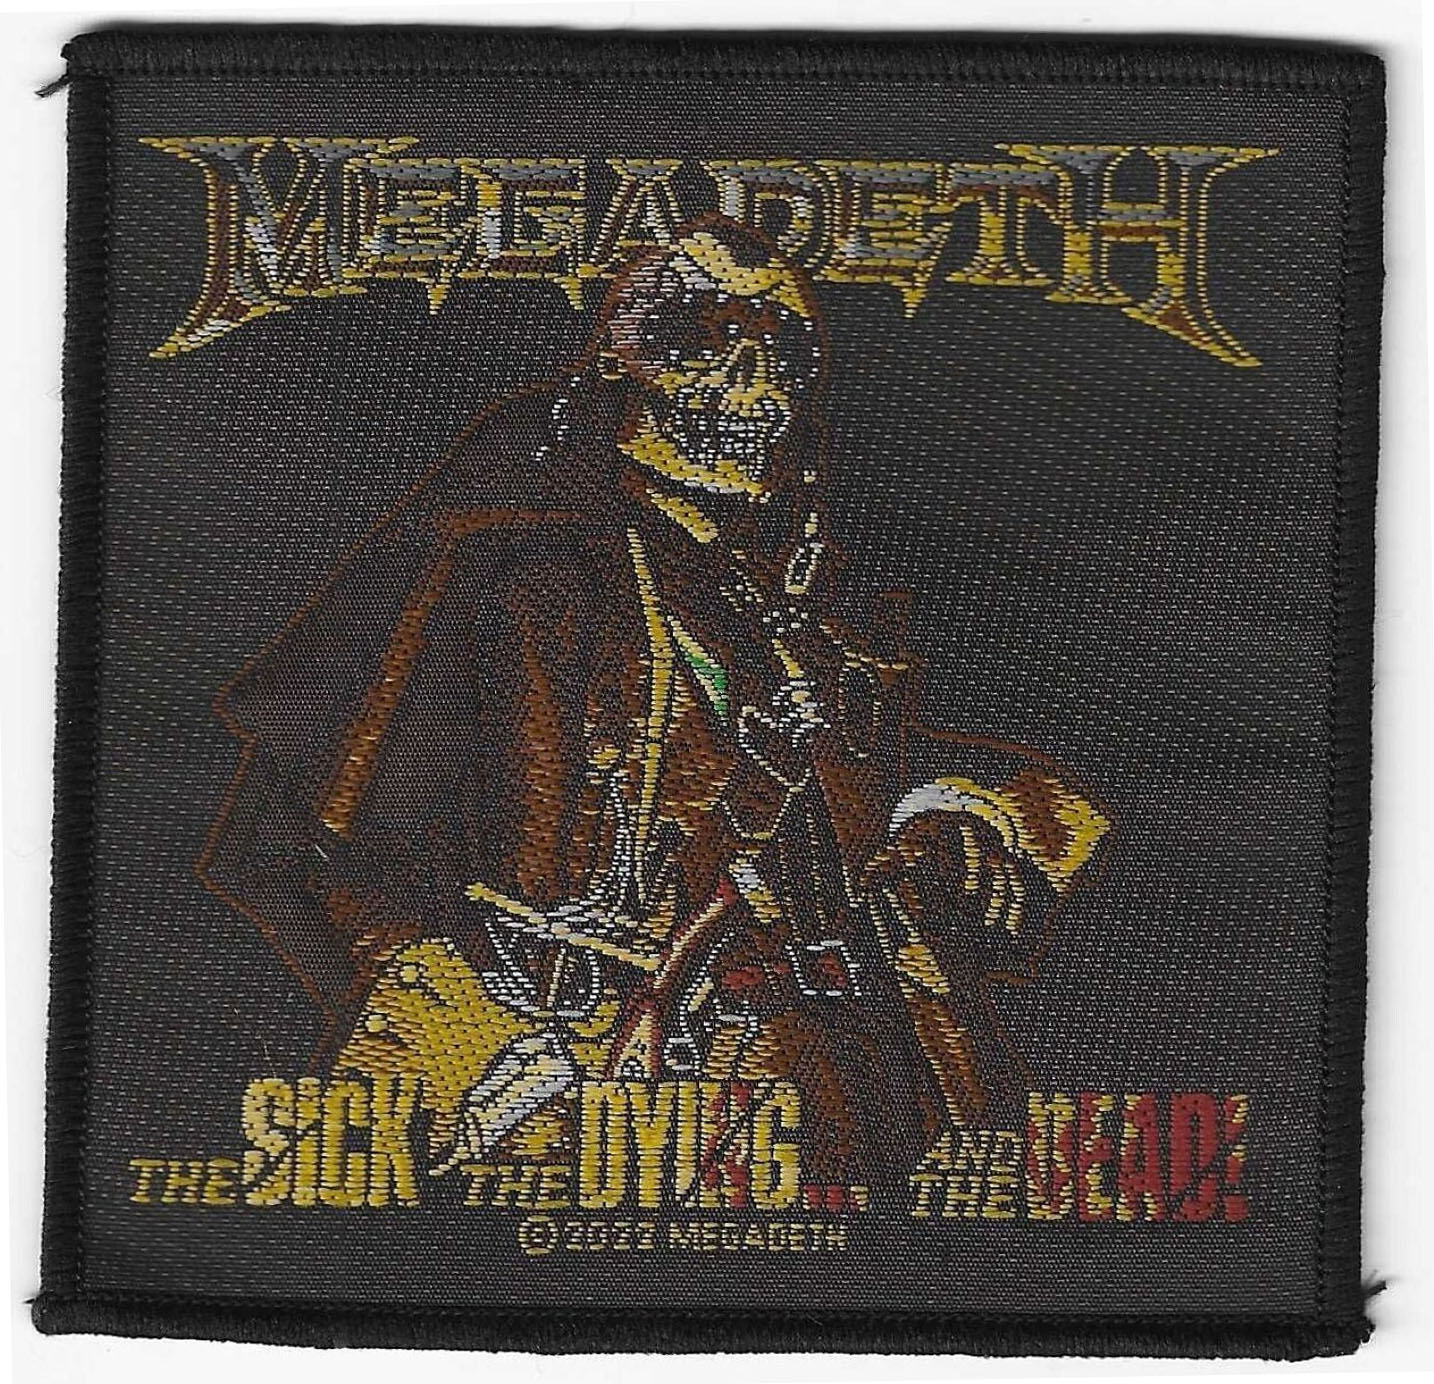 megadeth_the_sick_the_dying_patch_01_copy_1685188406.jpg